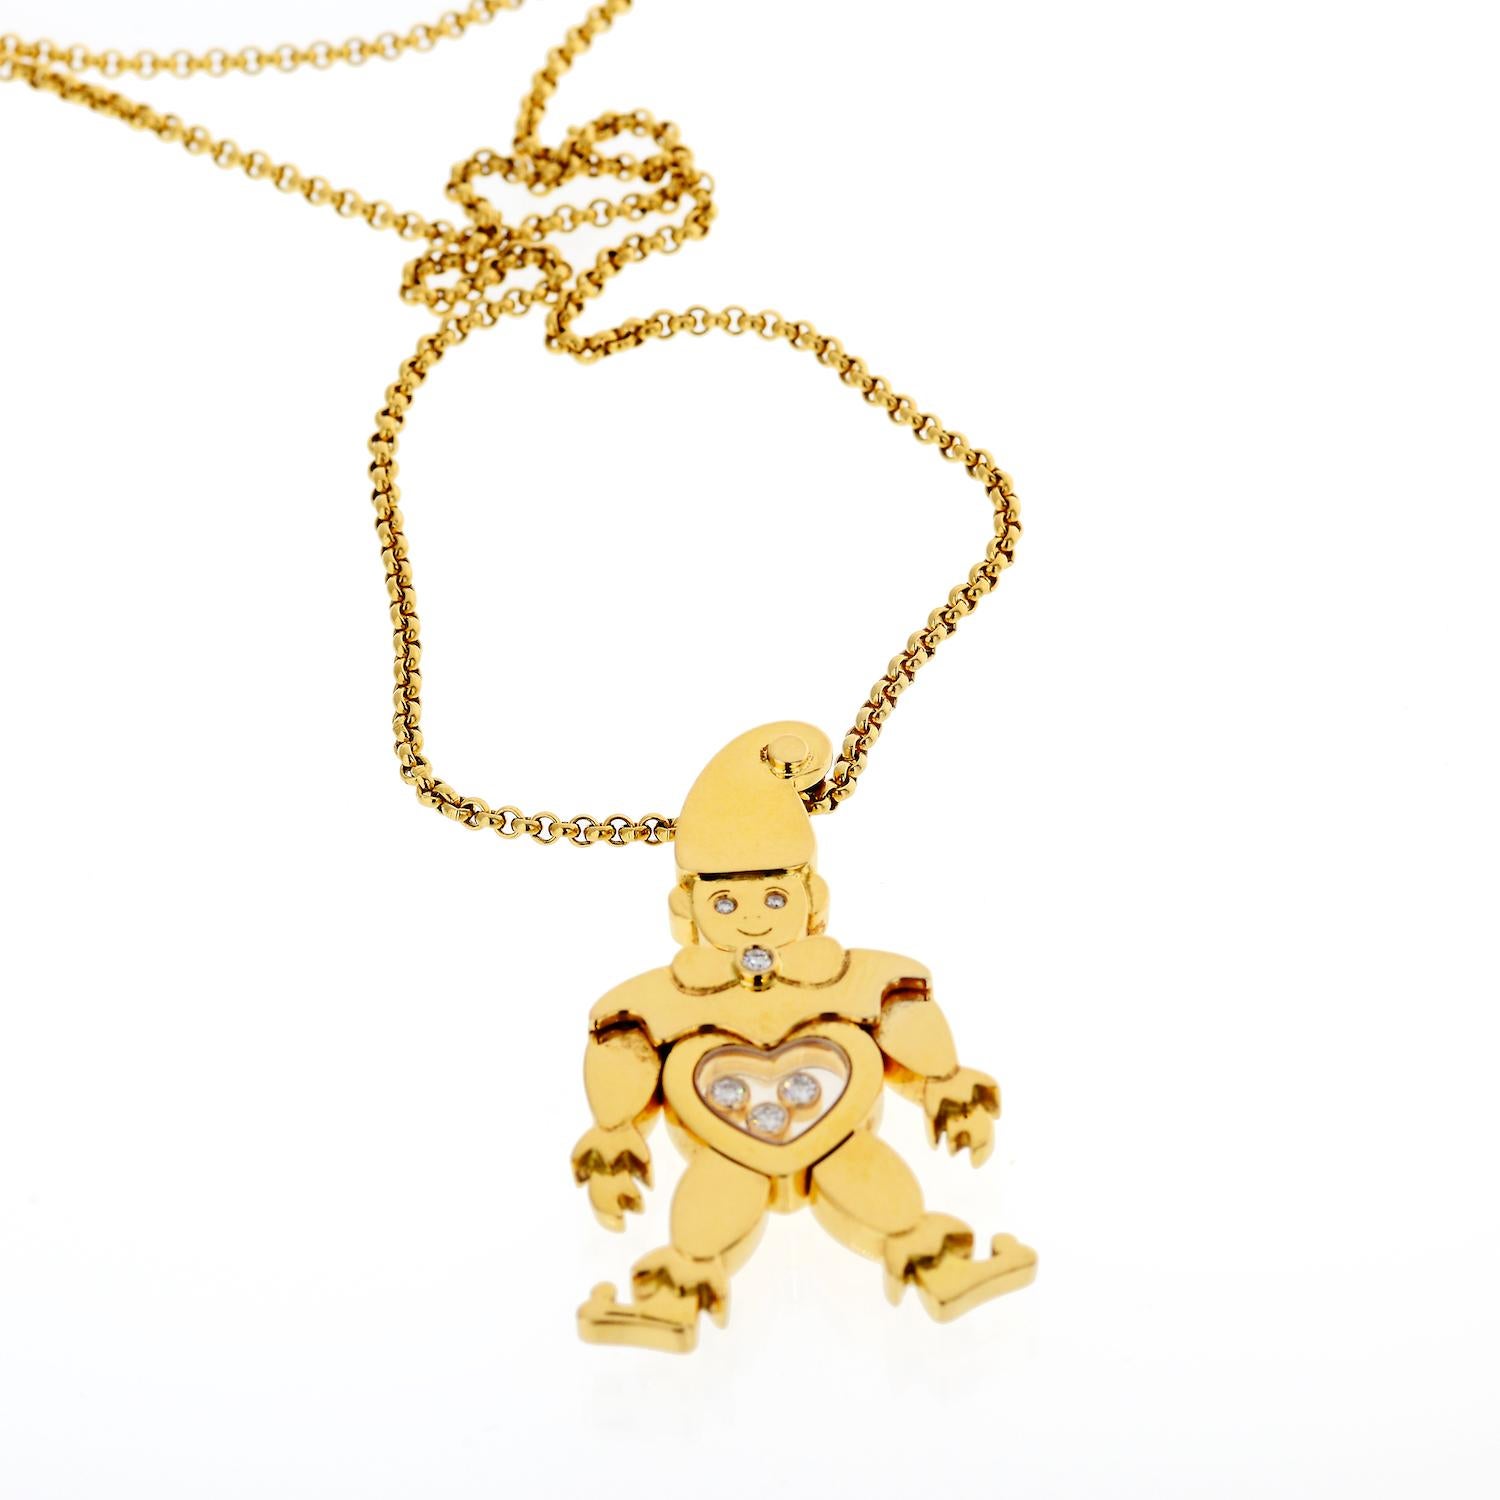 Vintage Clown by Chopard from the Happy Diamond collection. 

Material: 18K Yellow Gold
Diamonds: Rounds
Three happy diamonds.
Six diamonds in total.

Chain: 16 inches.